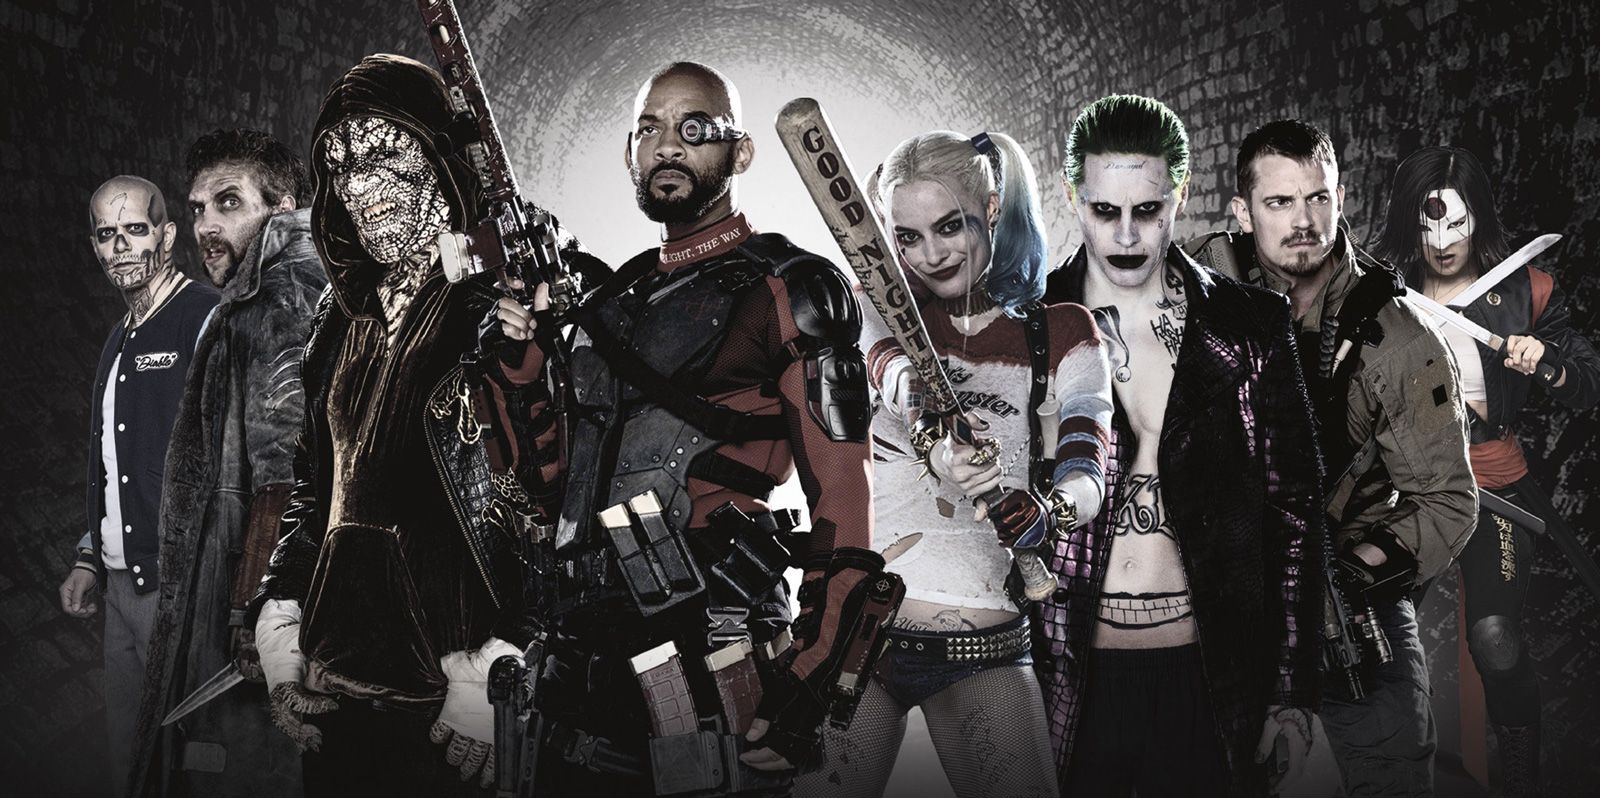 New Suicide Squad image feature The Joker, Harley Quinn, and more